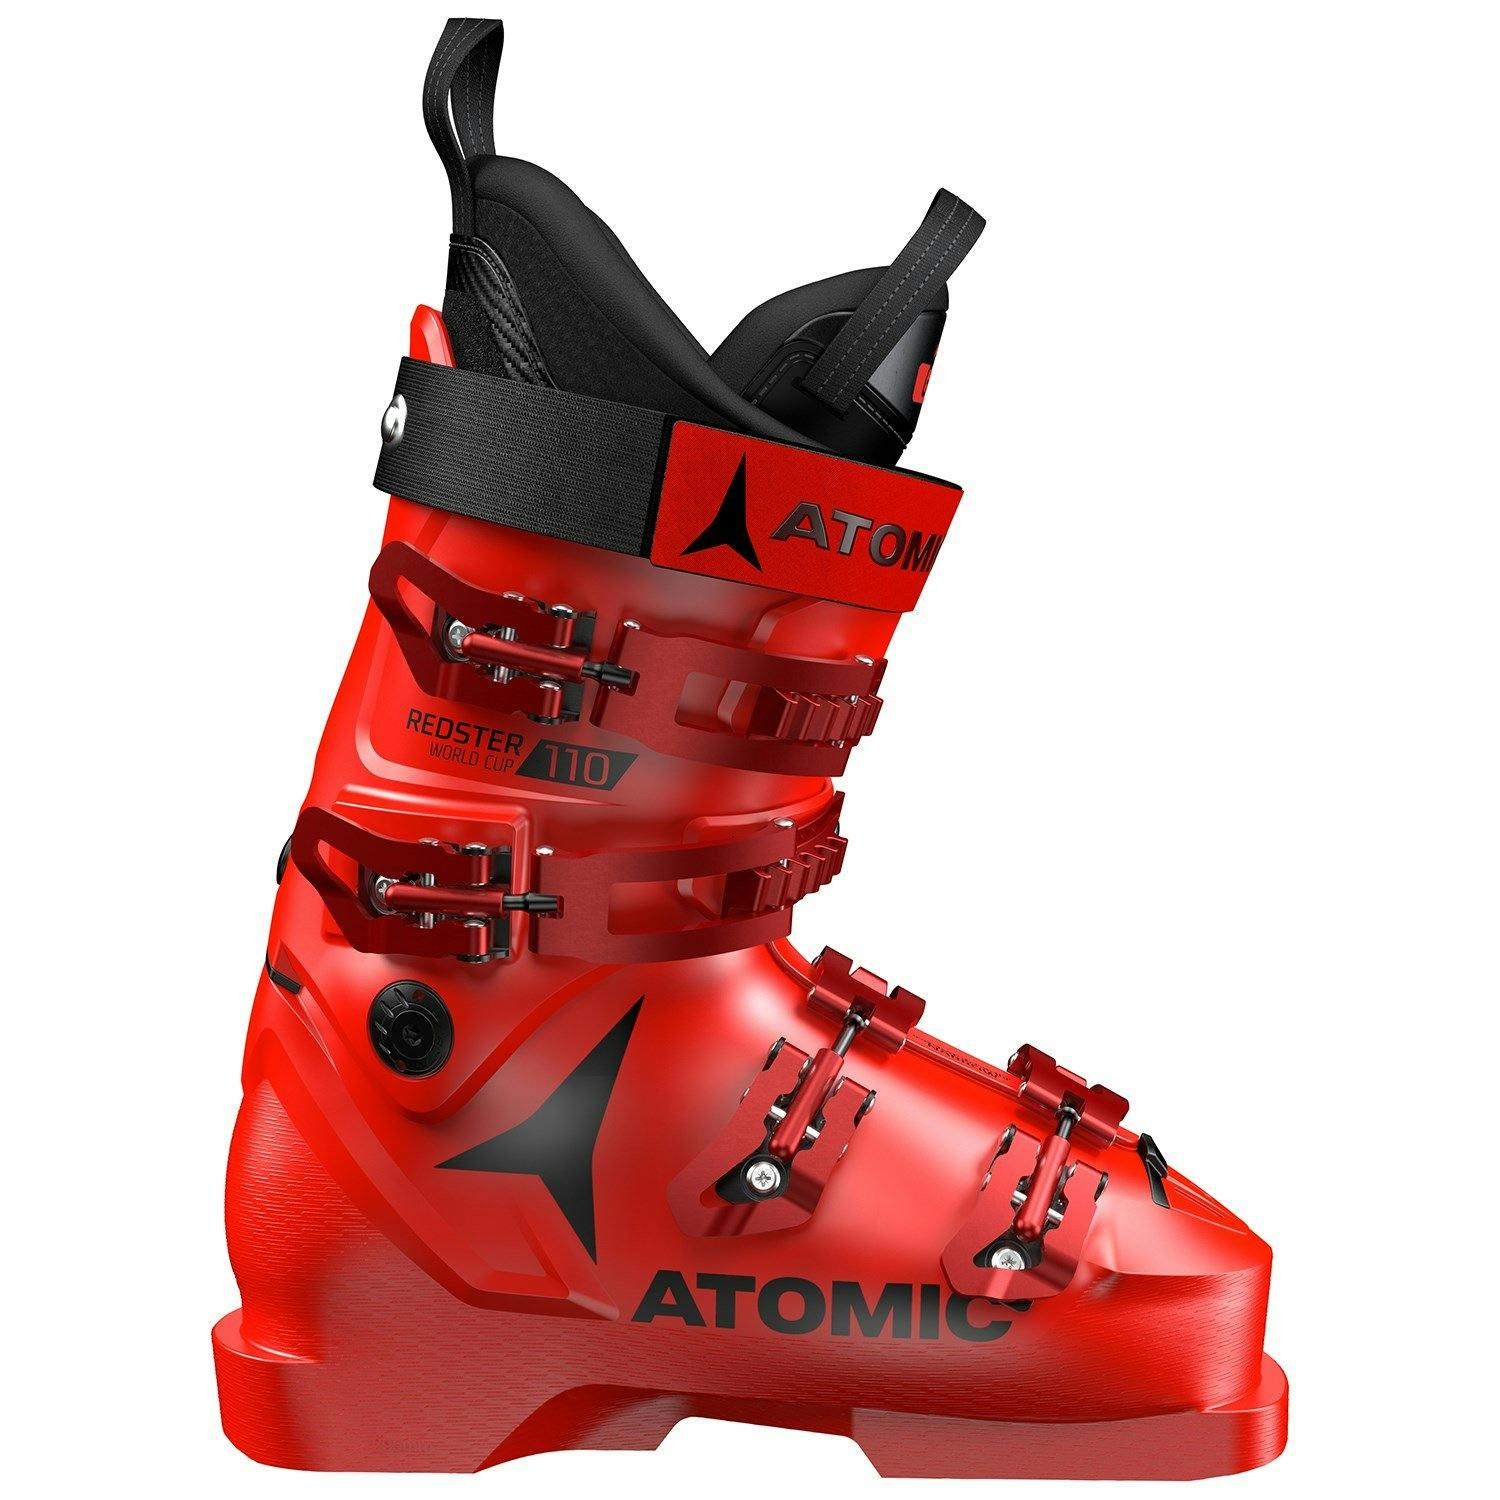 Atomic Redster World Cup 110 Ski Boots · 2019